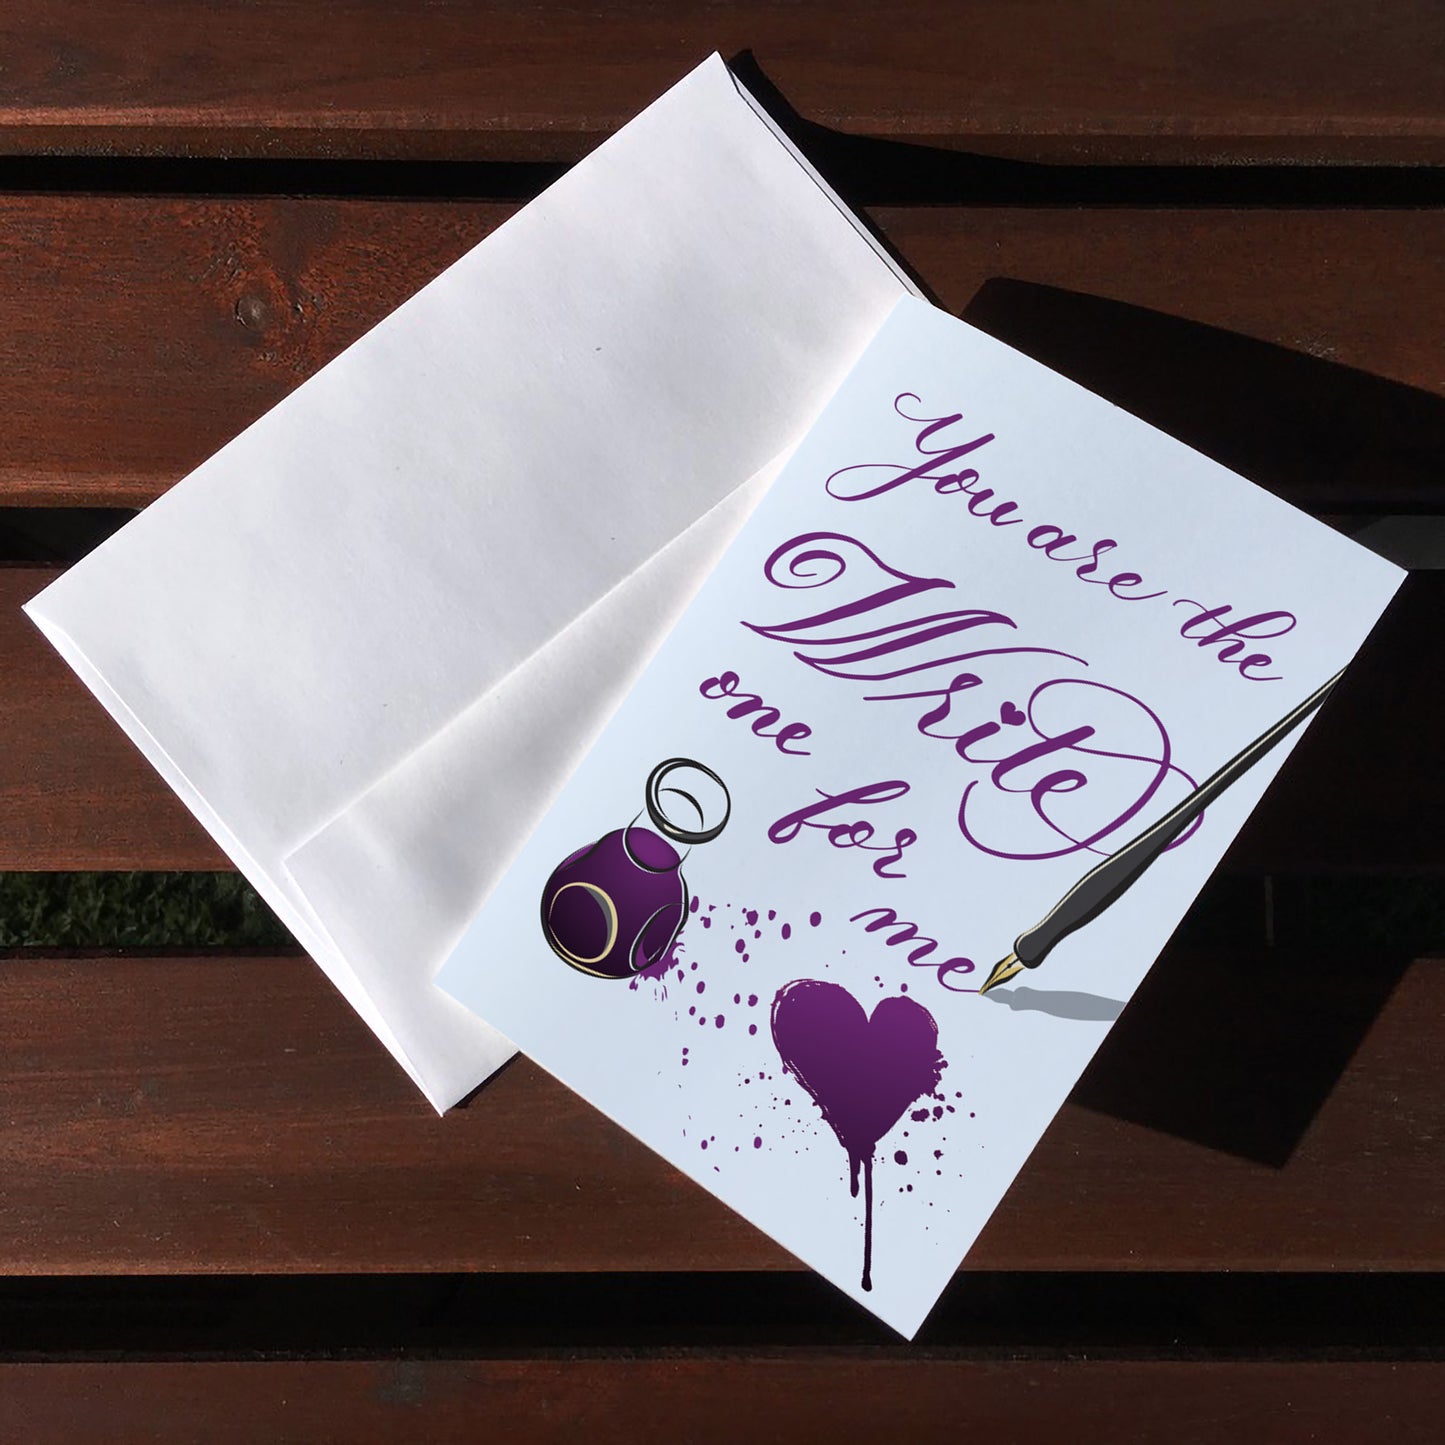 A top view of the greeting card: "You are the Write one for me"